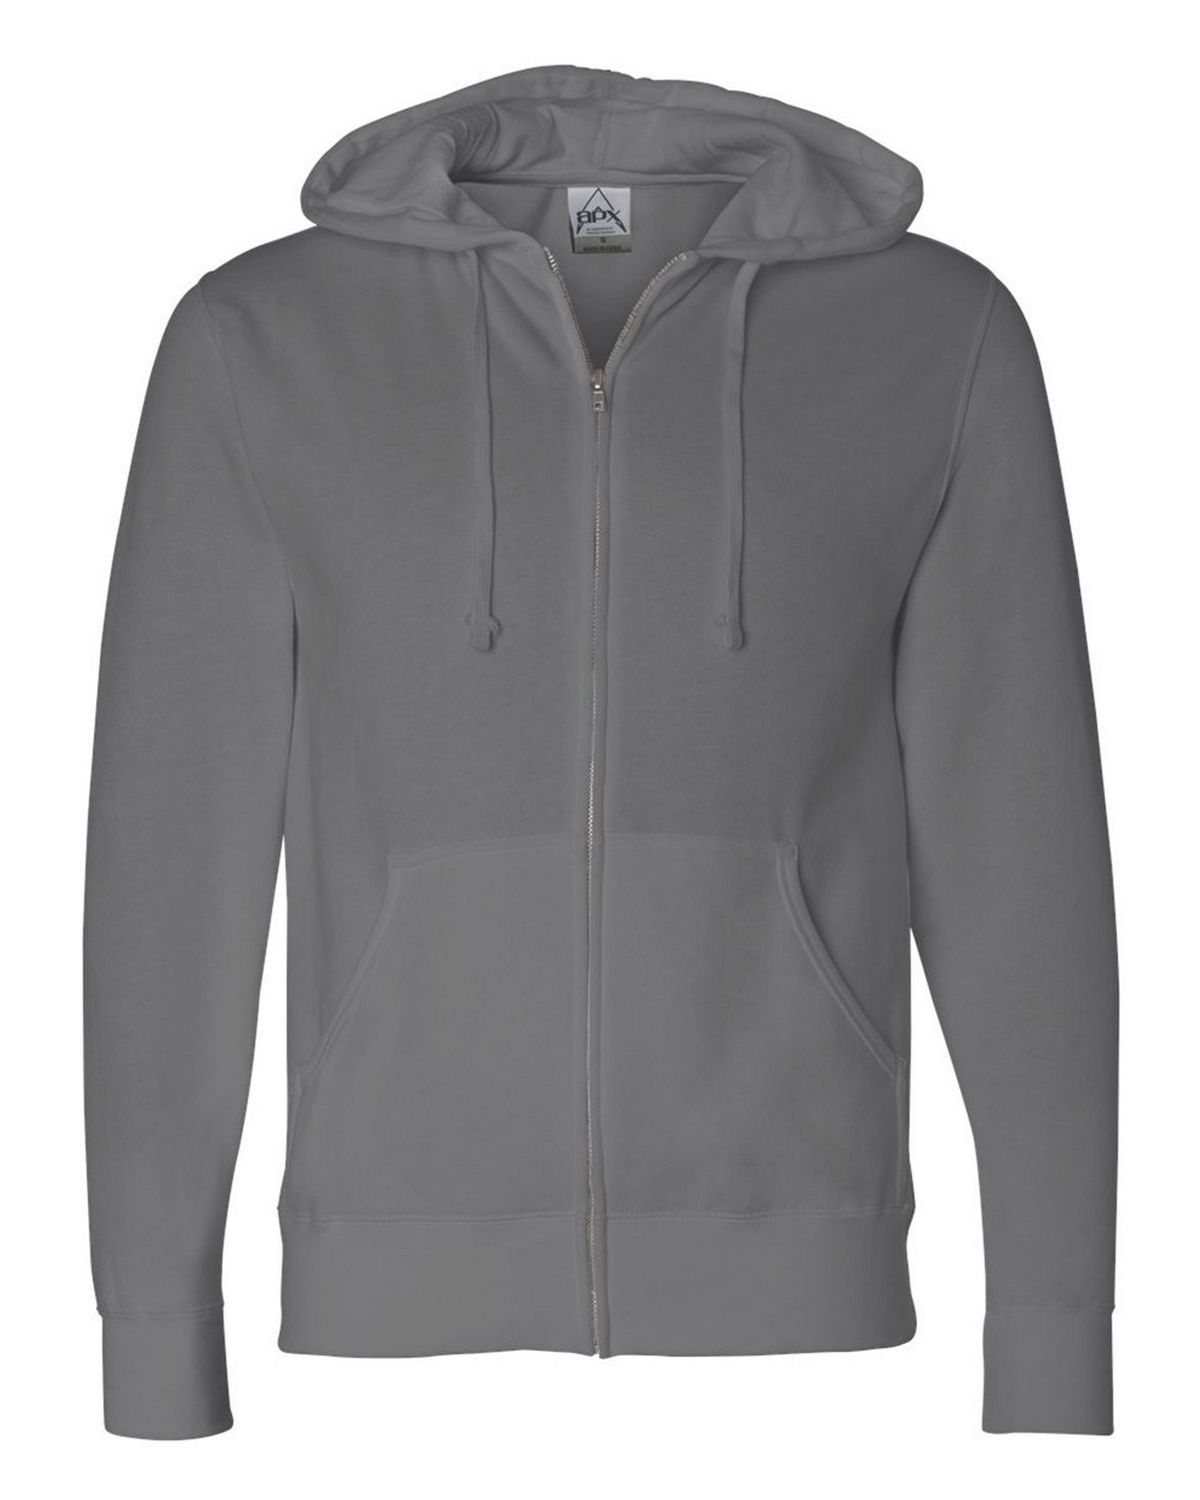 Size Chart for Independent Trading Co. AFX4000Z Mens Full-Zip Hooded ...